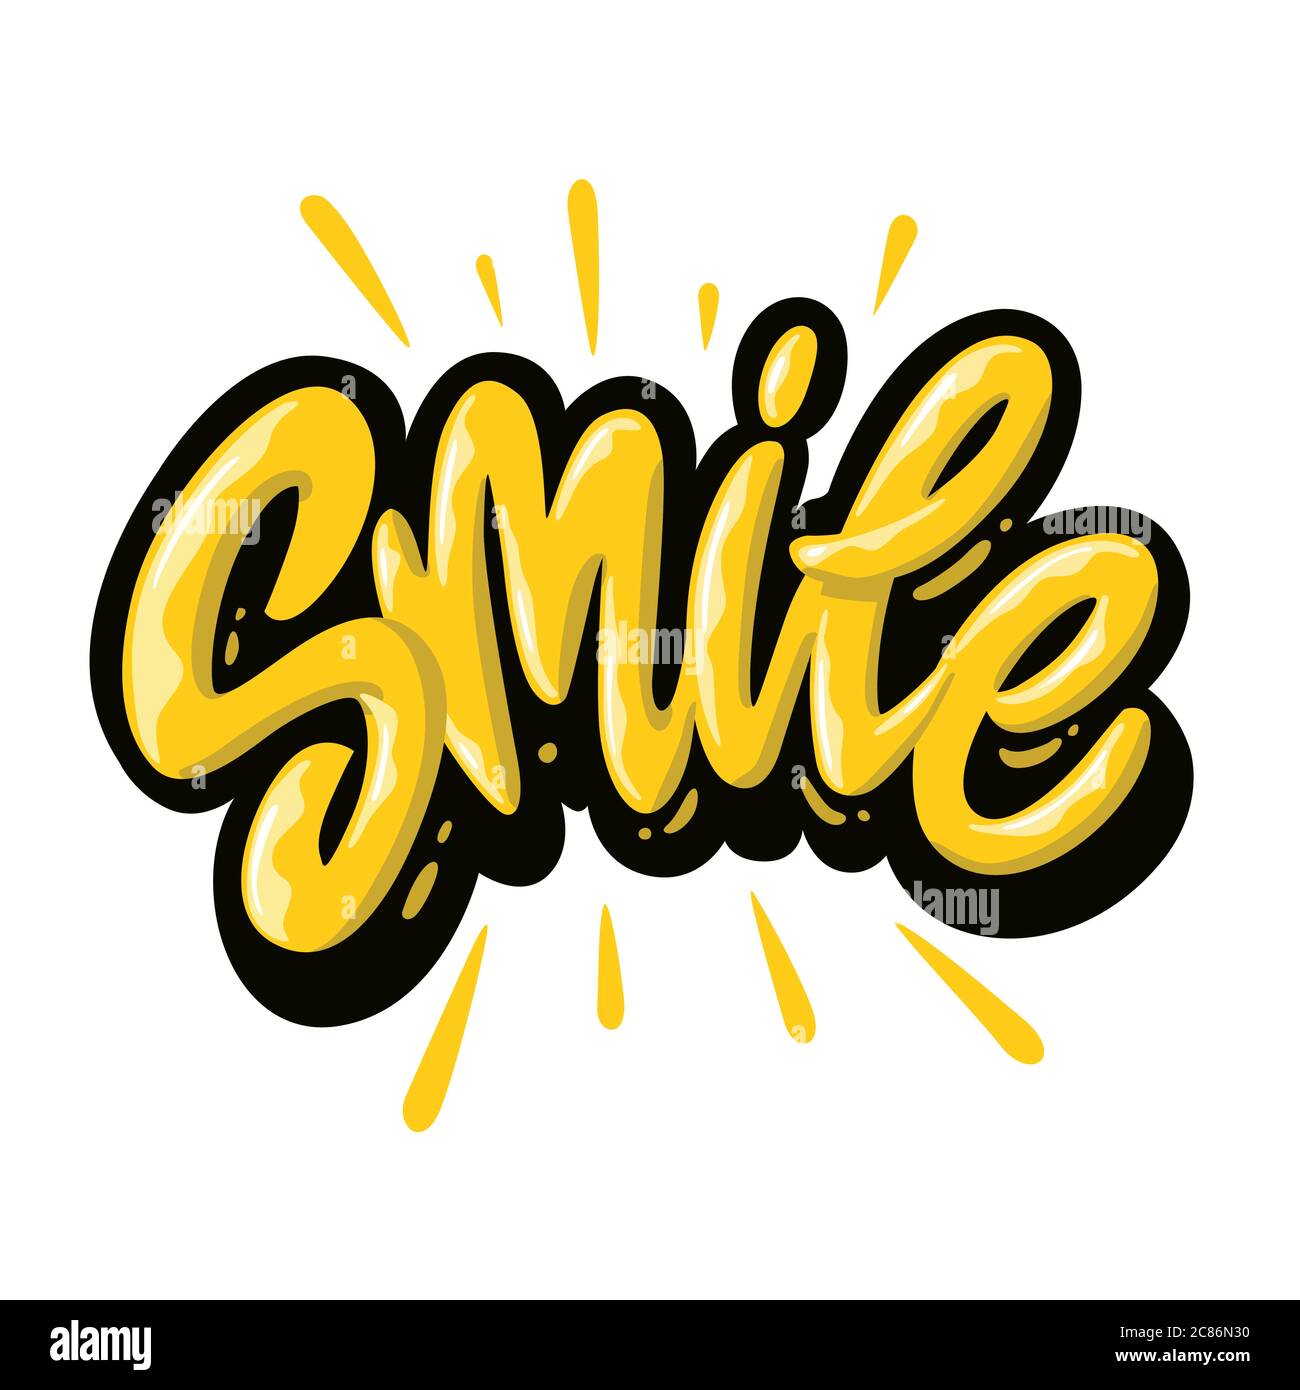 Smile. Hand lettering colorful text. Design template for greeting cards, invitations, banners, gifts, prints and posters. Calligraphic inscription. Stock Vector